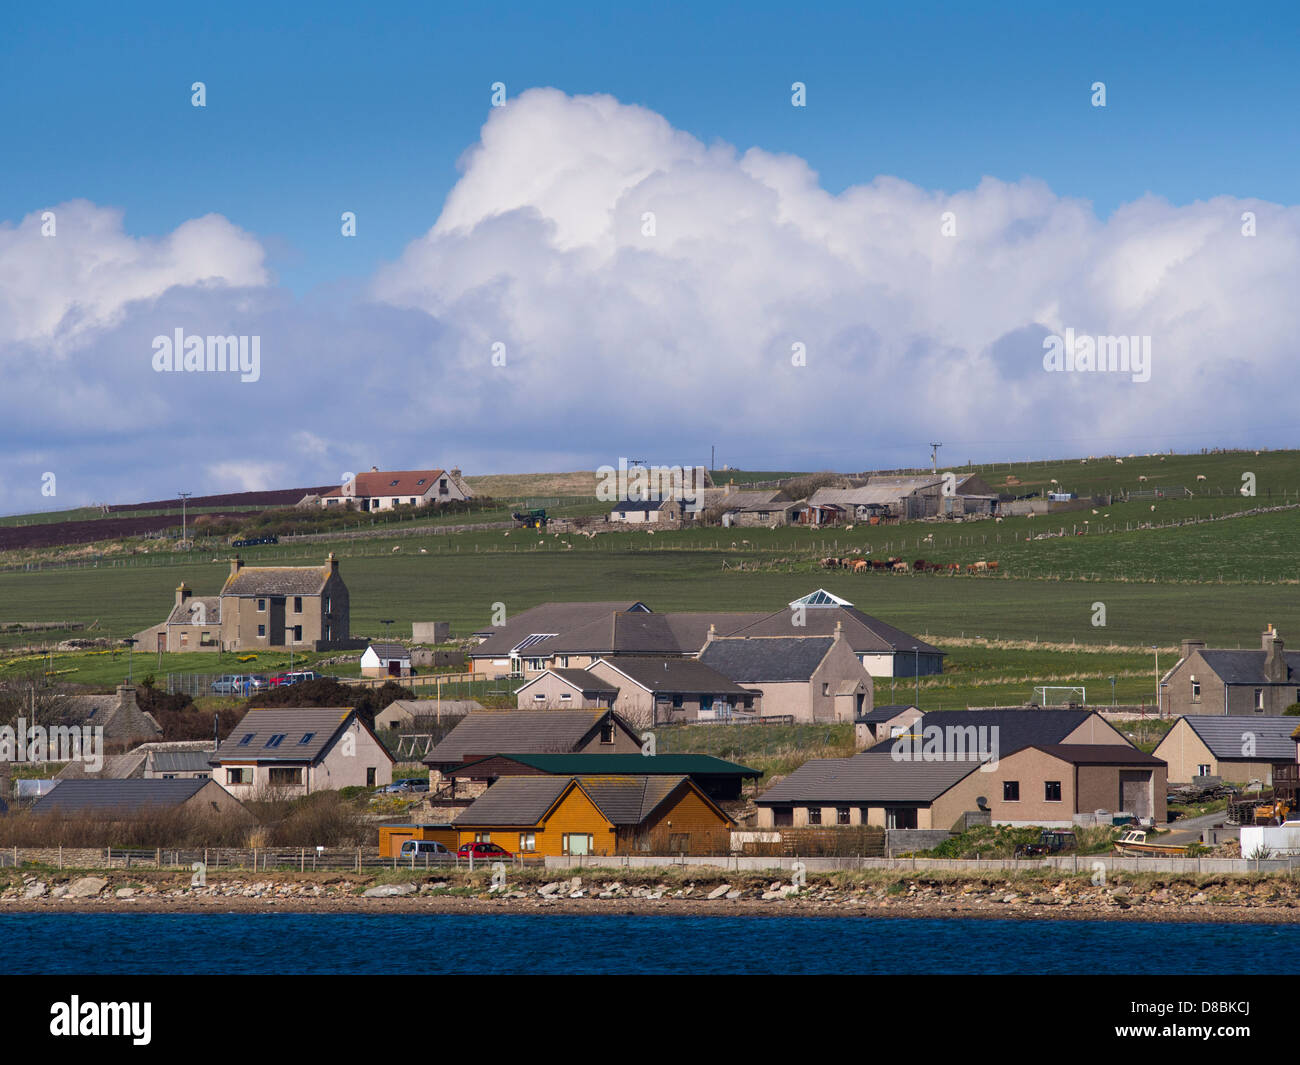 Scotland, Orkney Islands, Burray. Small farming settlement and agriculture land on the Orkney island of Burray. Stock Photo